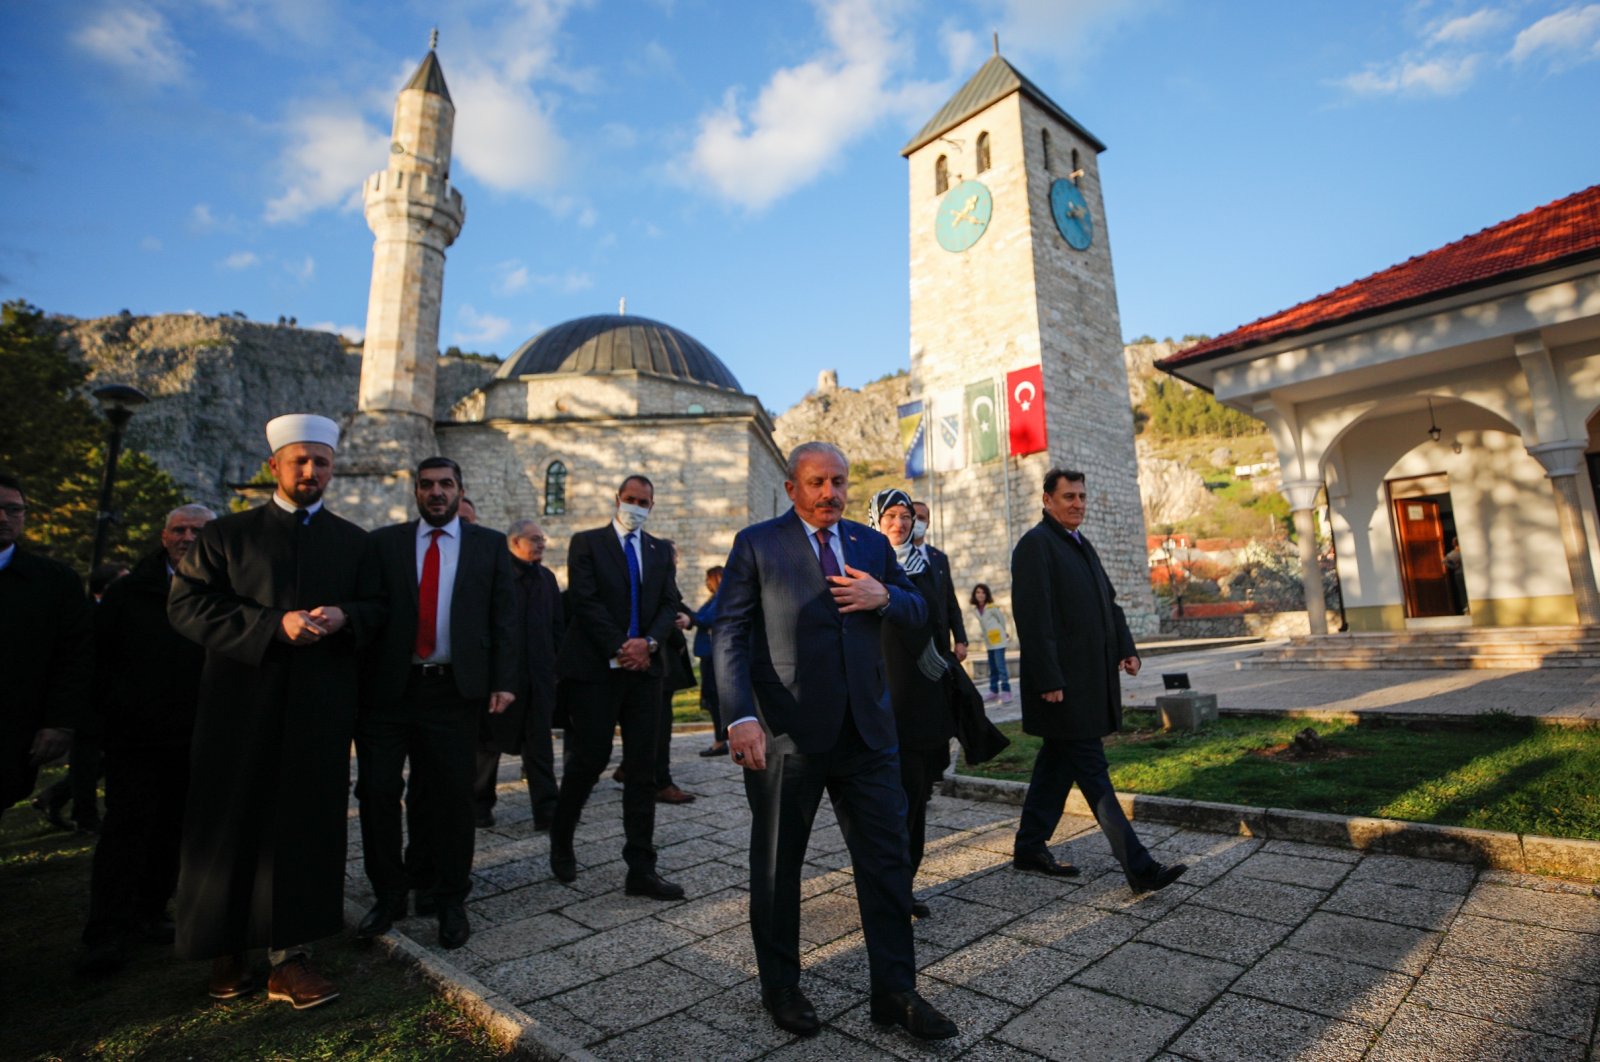 Parliament Speaker Mustafa Şentop (C) and the accompanying delegation attend the iftar dinner at the Islamic Cultural Center in the city of Livno in western Bosnia-Herzegovina, April 25, 2022. (AA)